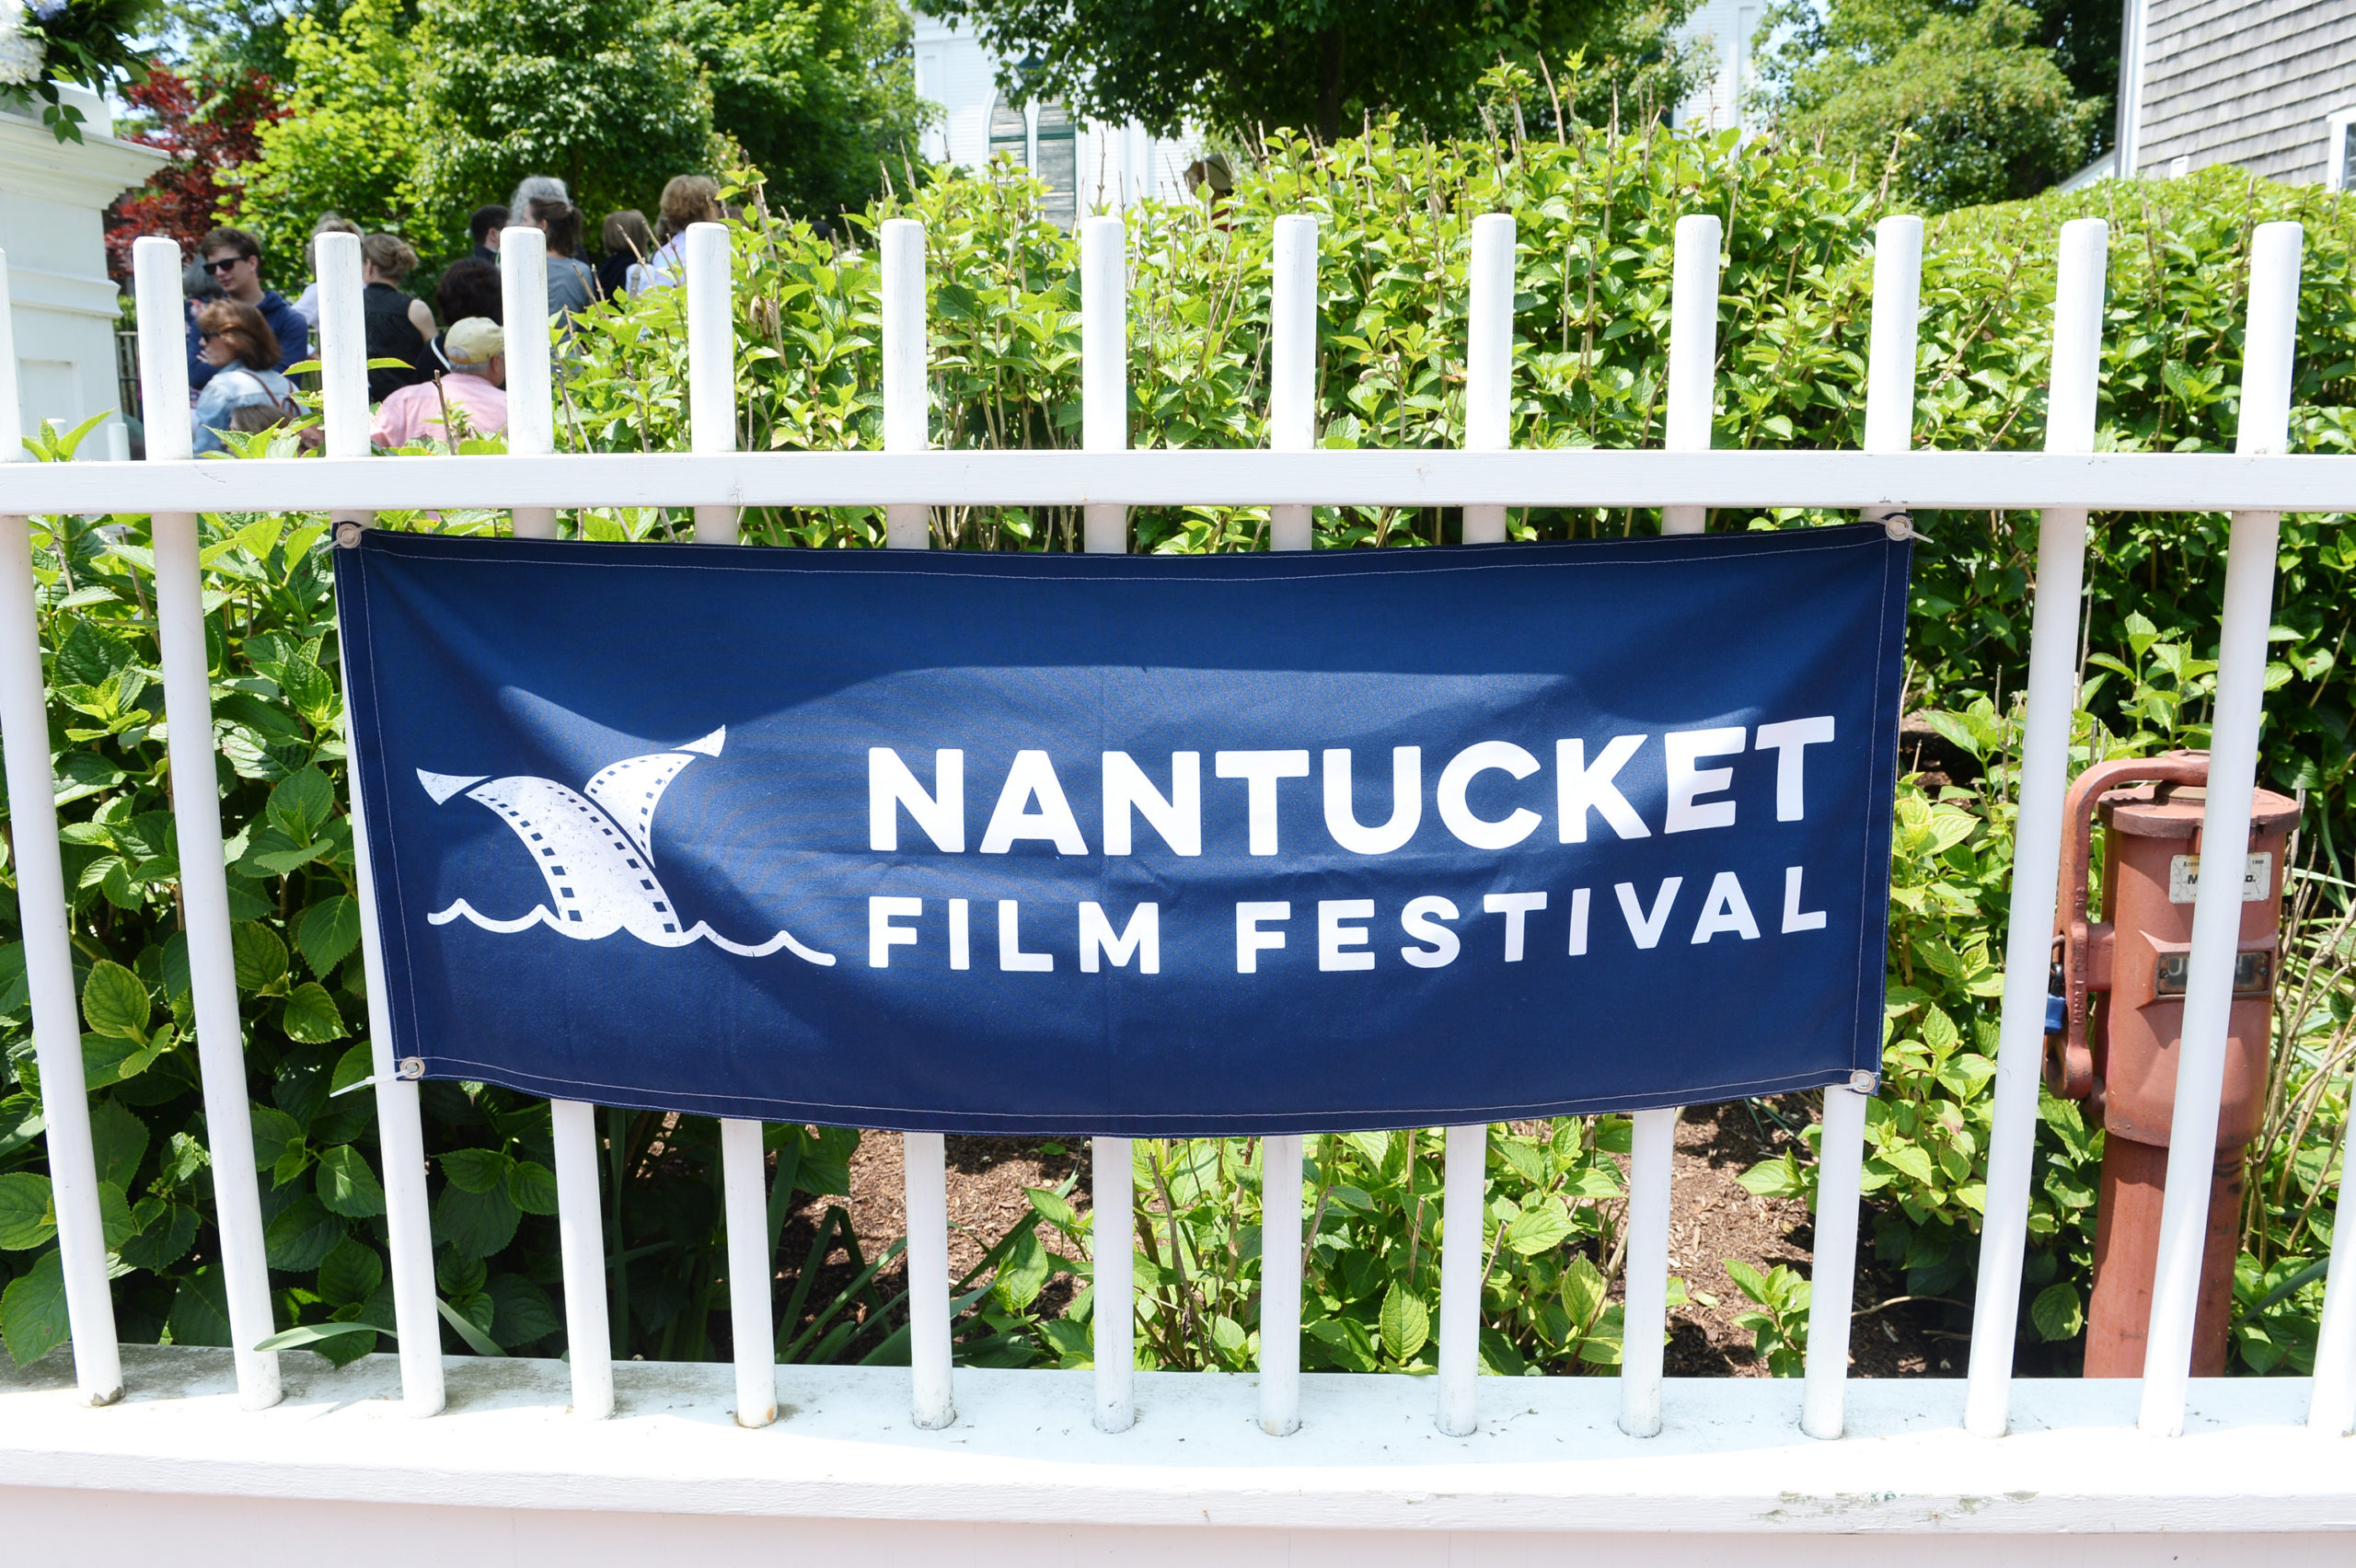 NANTUCKET, MASSACHUSETTS - JUNE 22: A view of signage during 'Comedy Roundtable: SNL Writers Room Gold' at First Congregational Church during the 2019 Nantucket Film Festival - Day Four on June 22, 2019 in Nantucket, Massachusetts. (Photo by Noam Galai/Getty Images for 2019 Nantucket Film Festival )